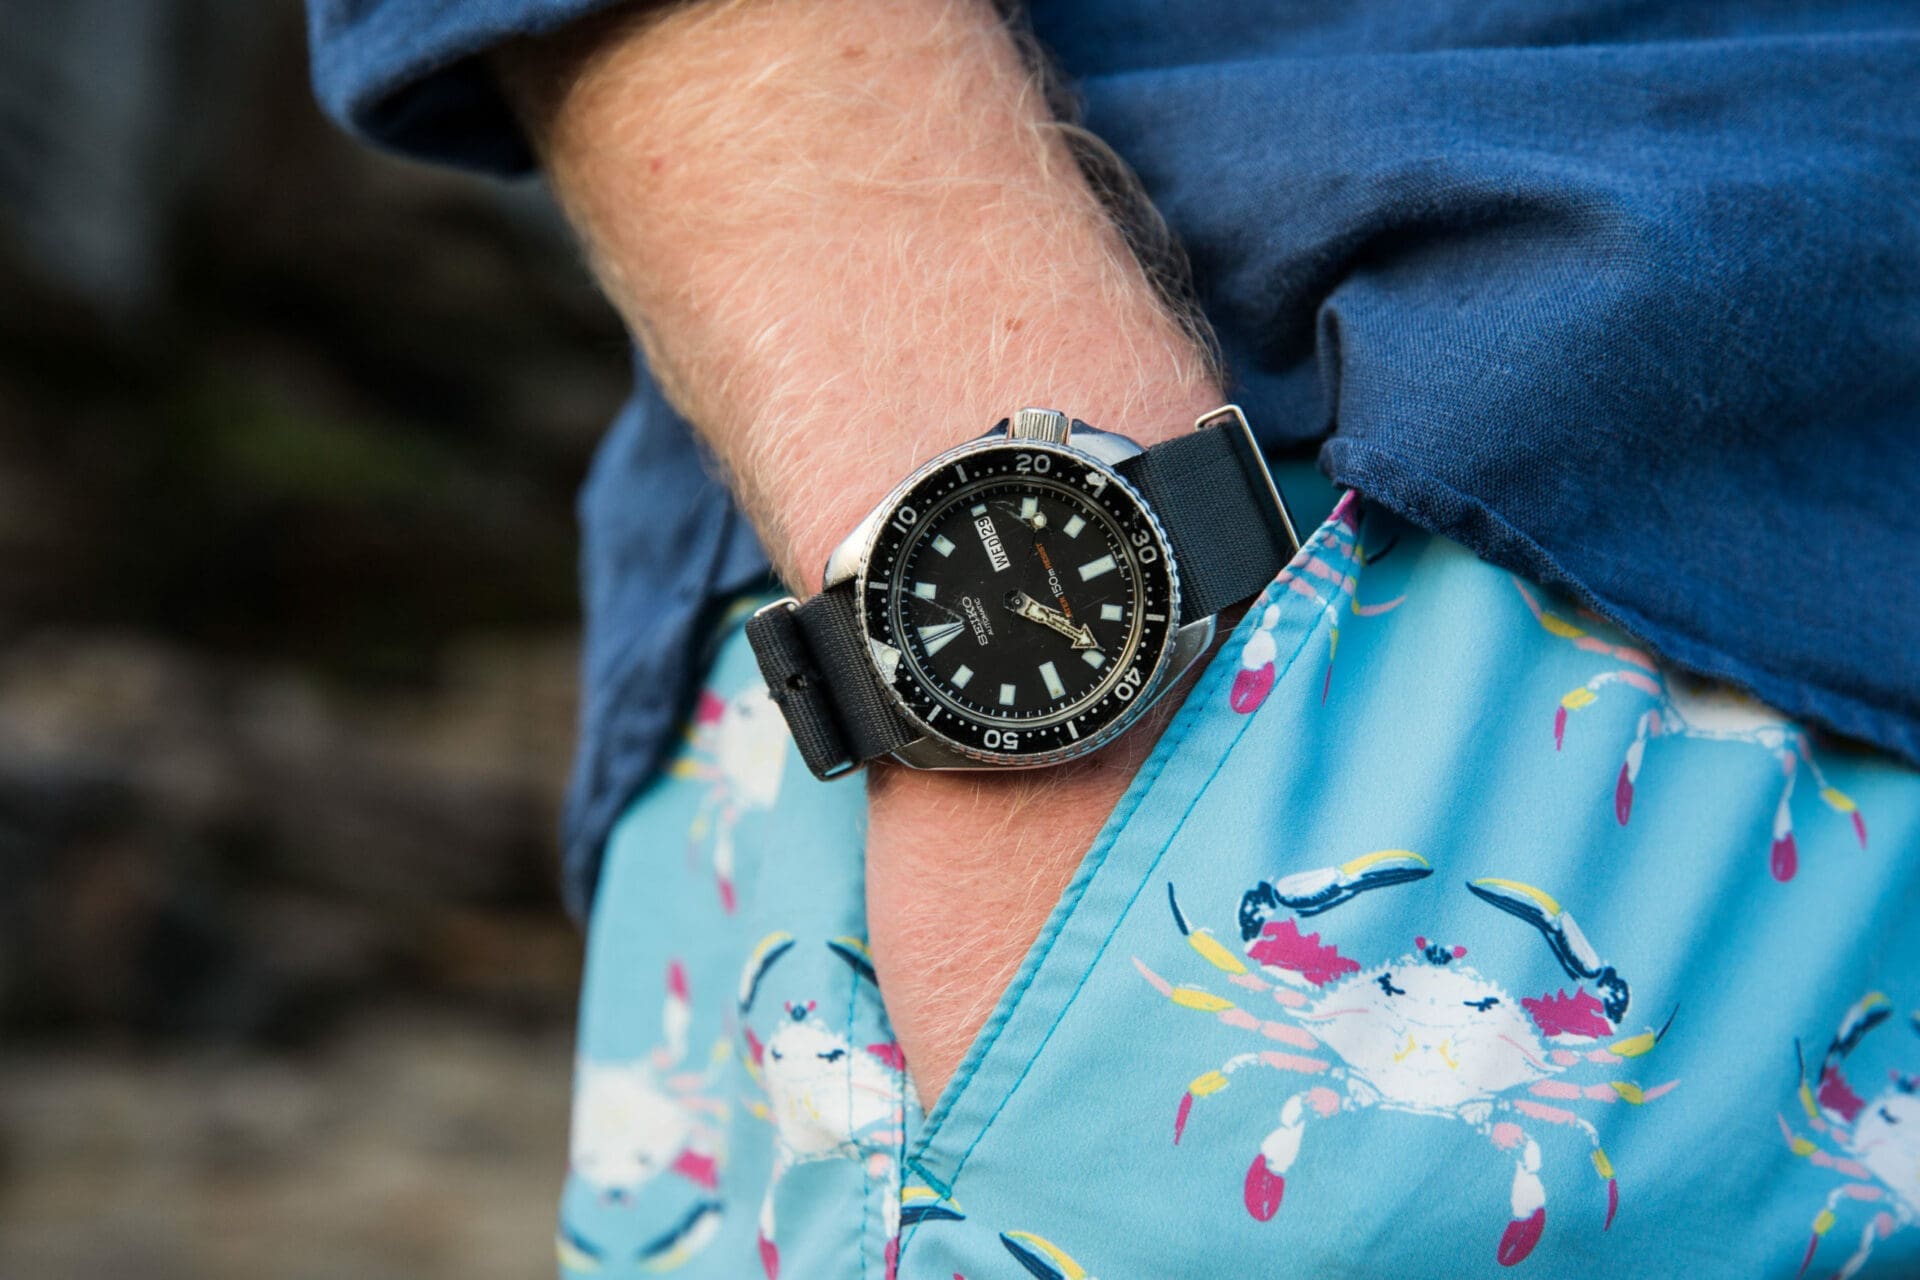 How a Seiko diver connected Jack with the daredevil uncle he never got to meet